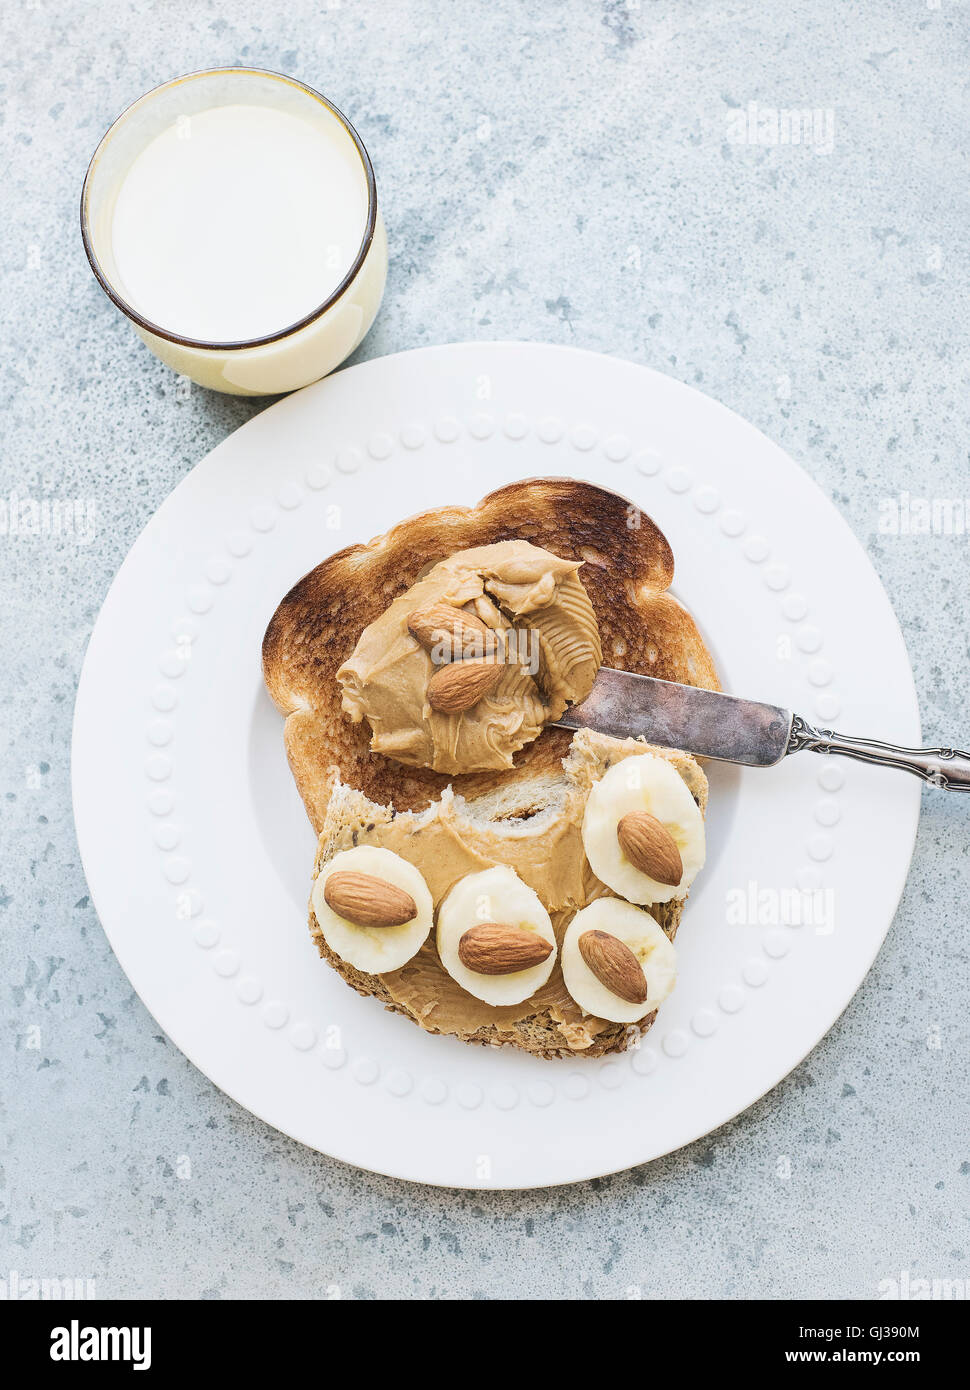 Overhead view of toast with almond butter, banana and milk Stock Photo